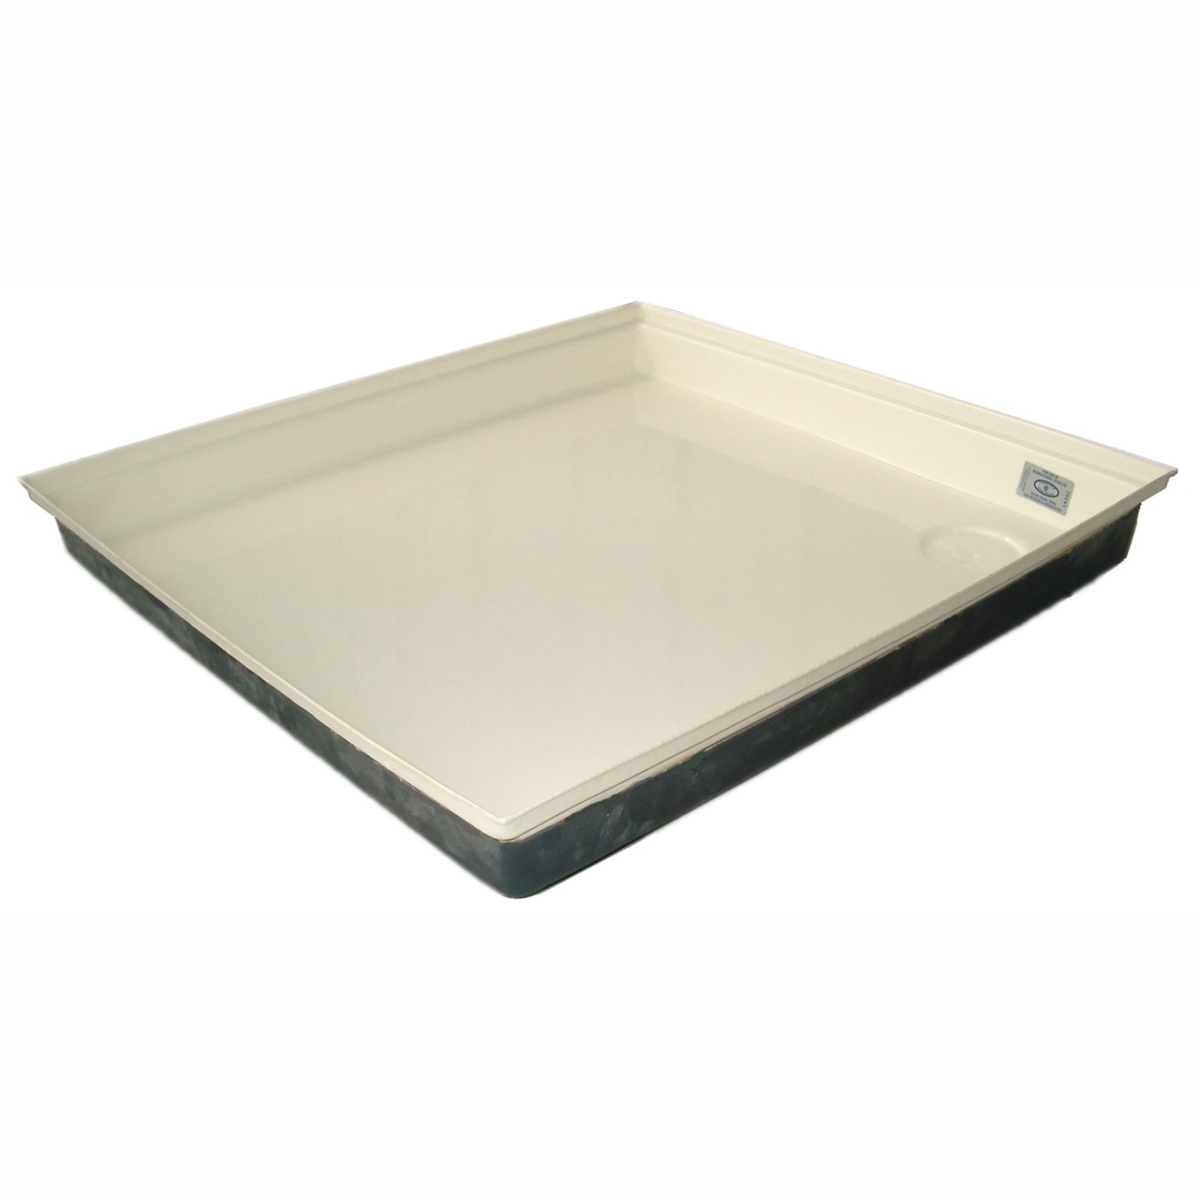 460 27 X 24 X 4 In. Shower Pan, Colonial White